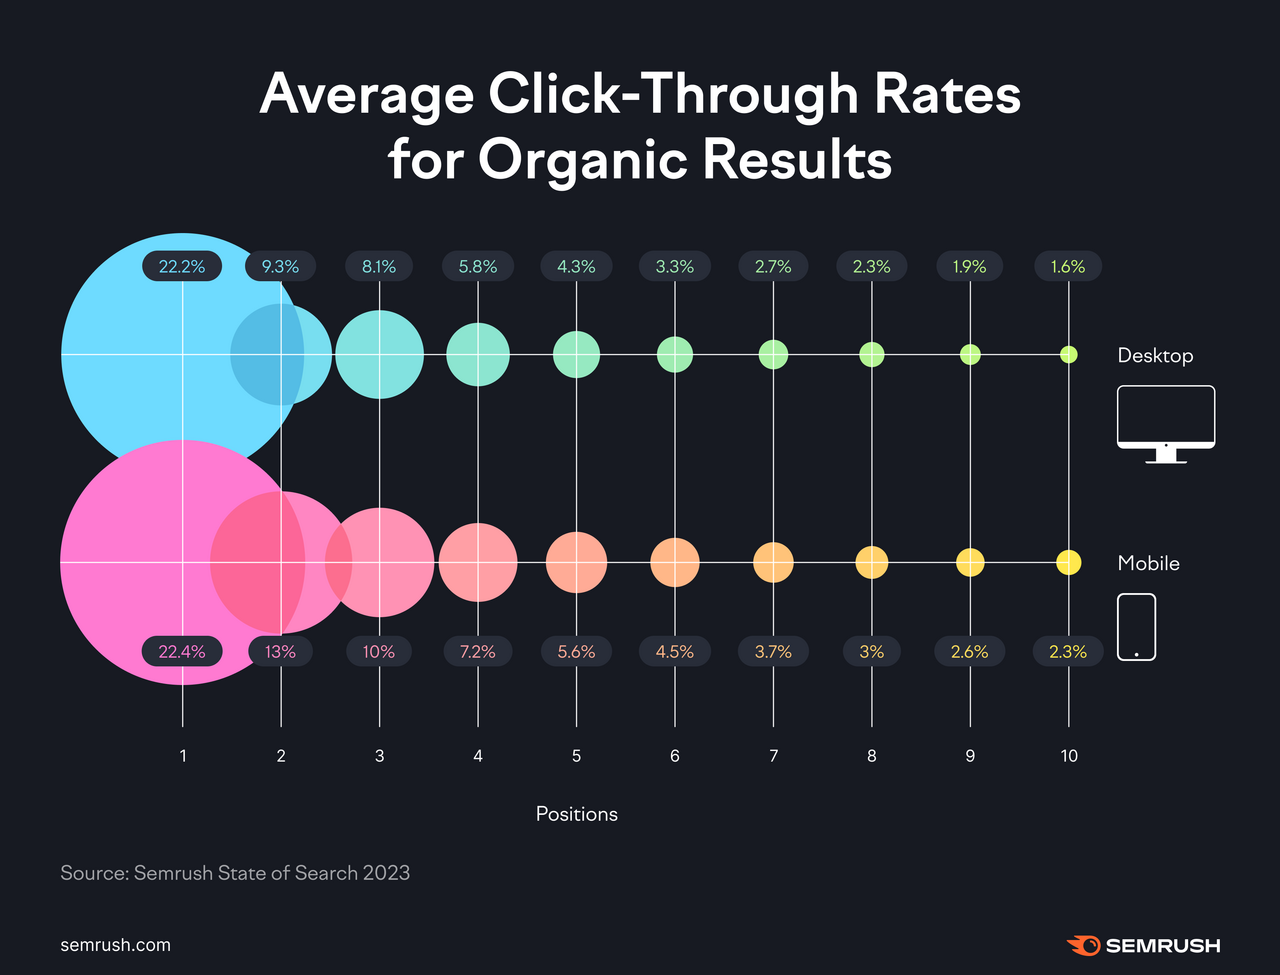 A chart showing that organic position 1 has an average click-through rate over 22%. This drops to below 3% in position 10.